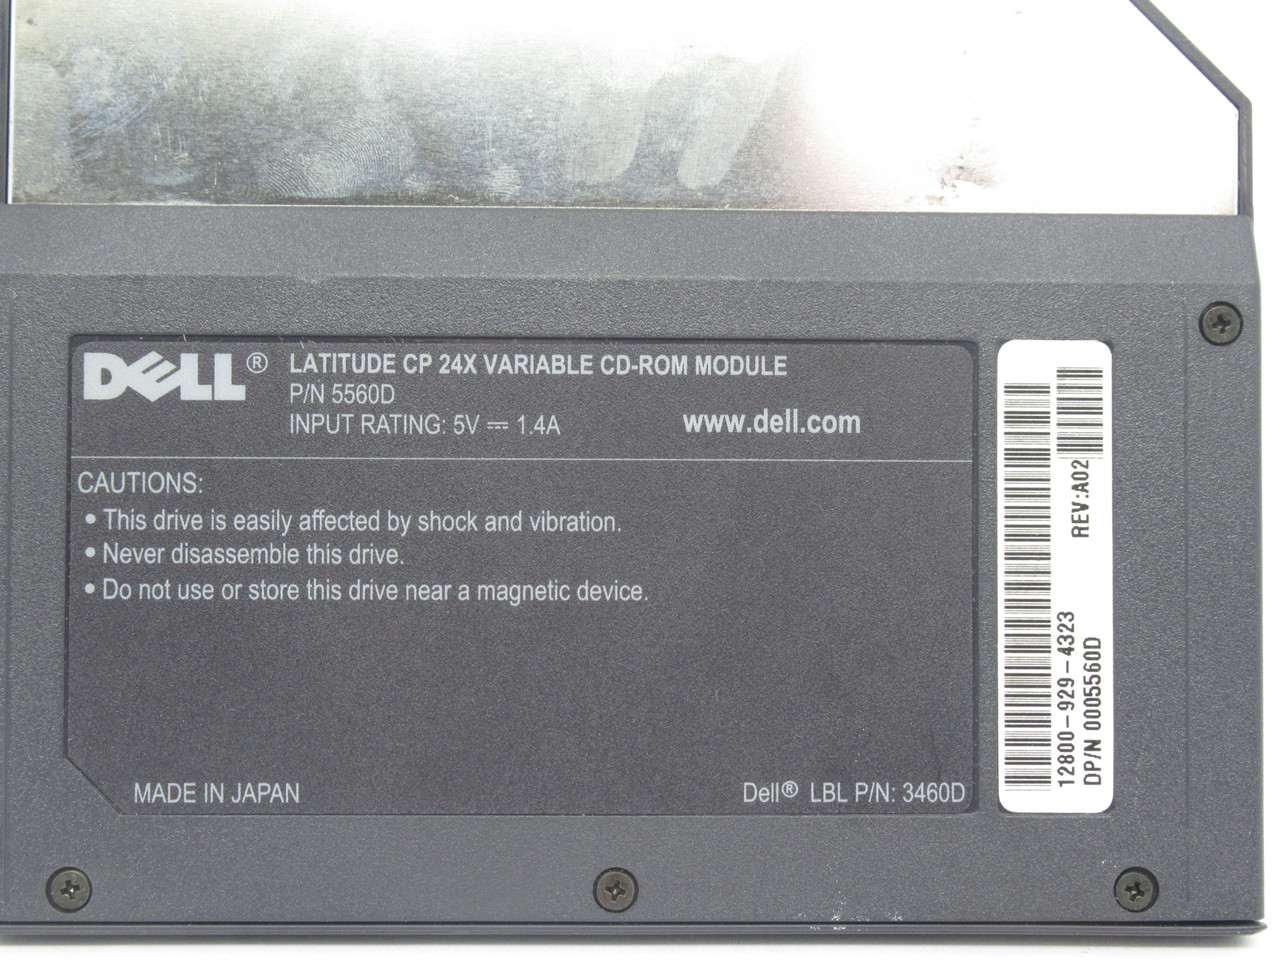 Dell 5560D Latitude CP 24X Variable CD-ROM Module 5V 1.4A Rev: A02 USED